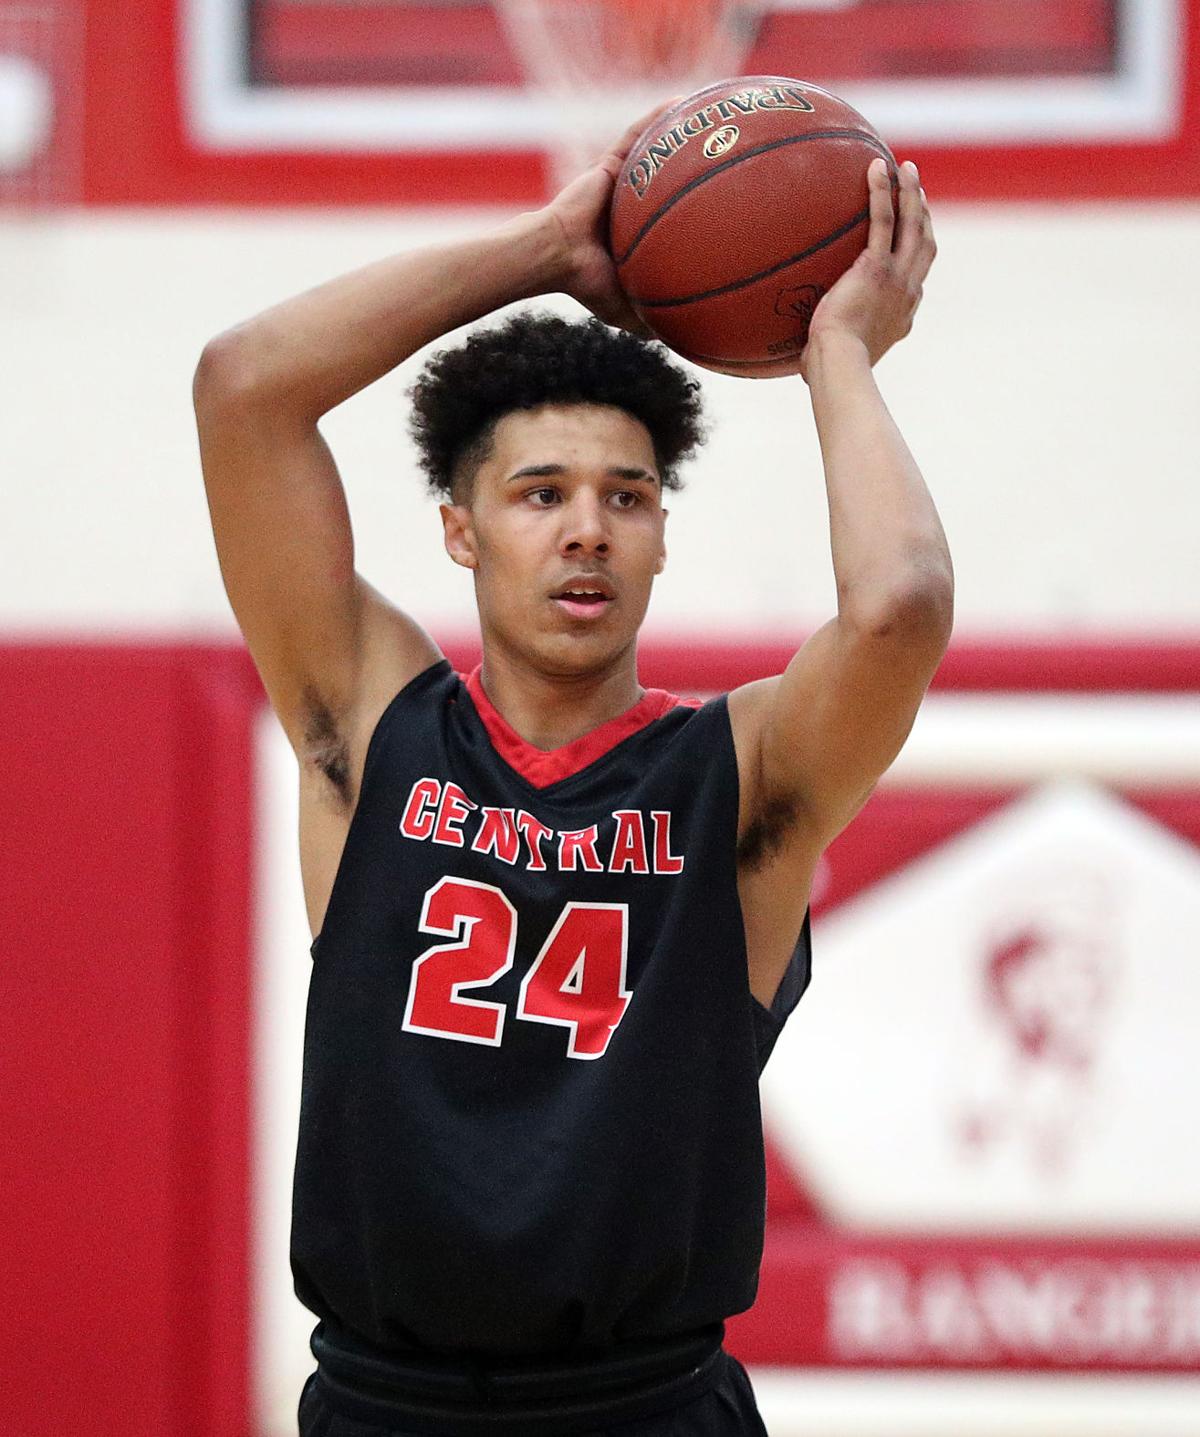 Offer to play together for Wisconsin Badgers basketball team lured in